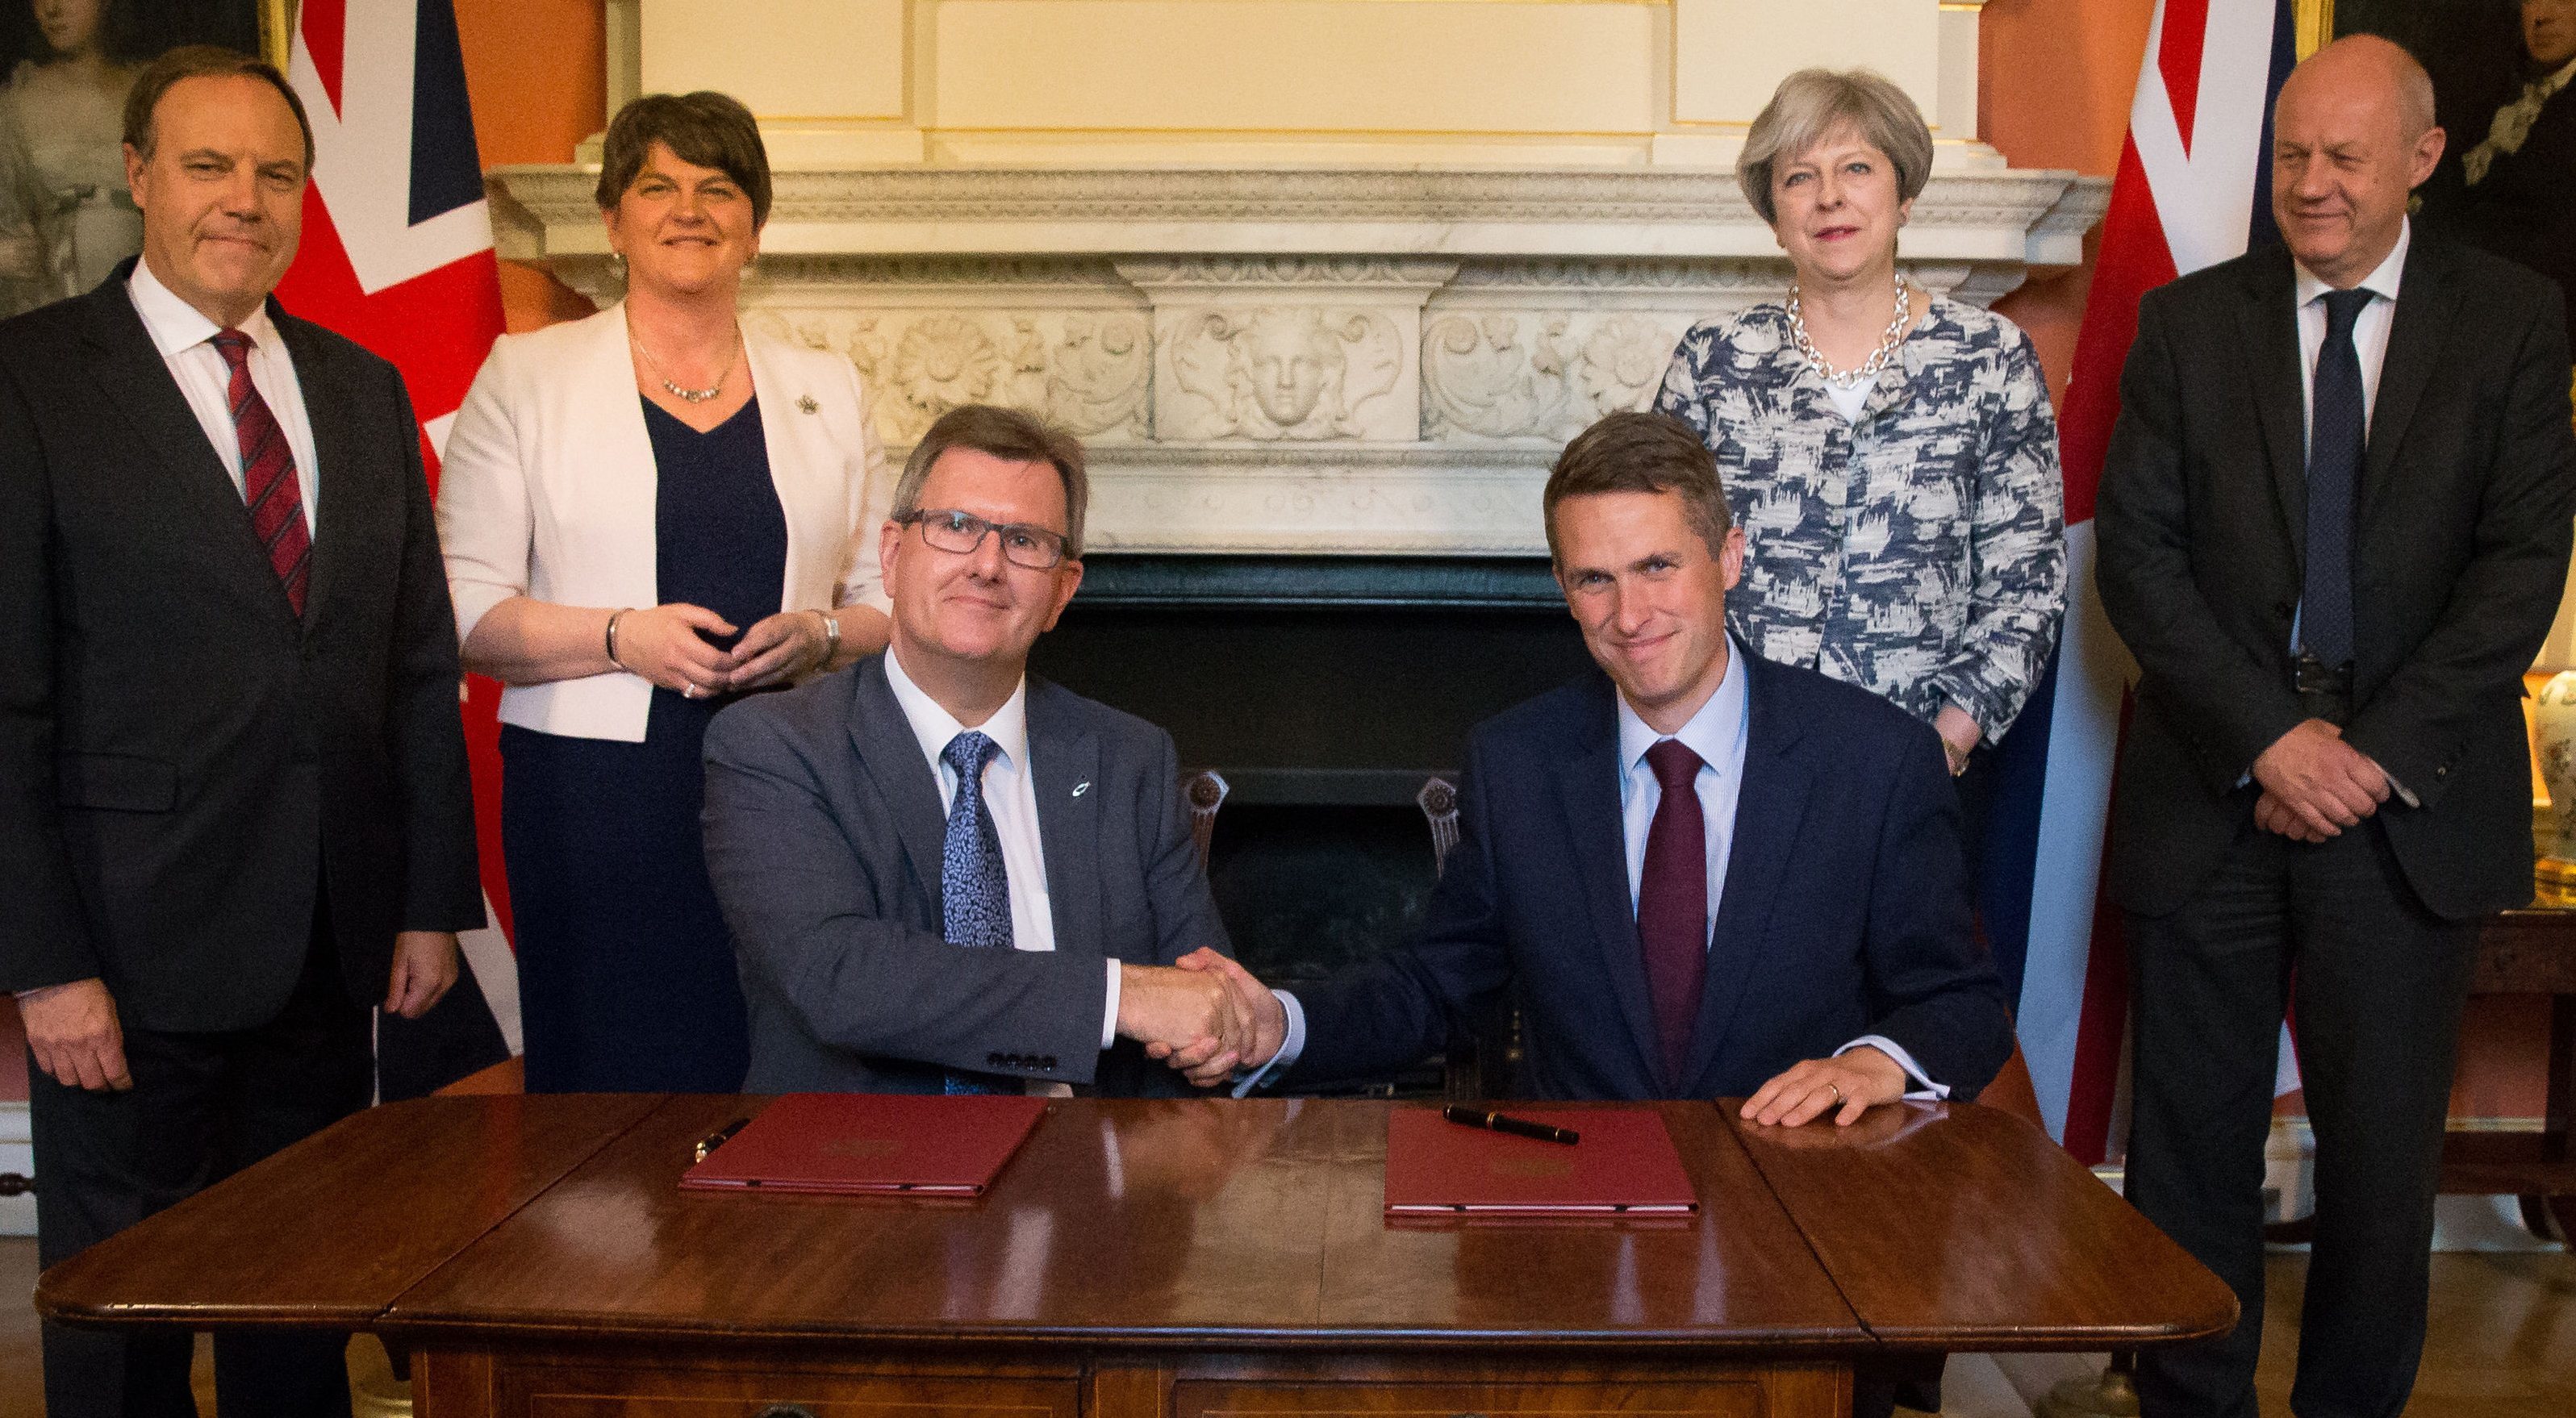 The DUP agreed a deal to support the minority Conservative government.